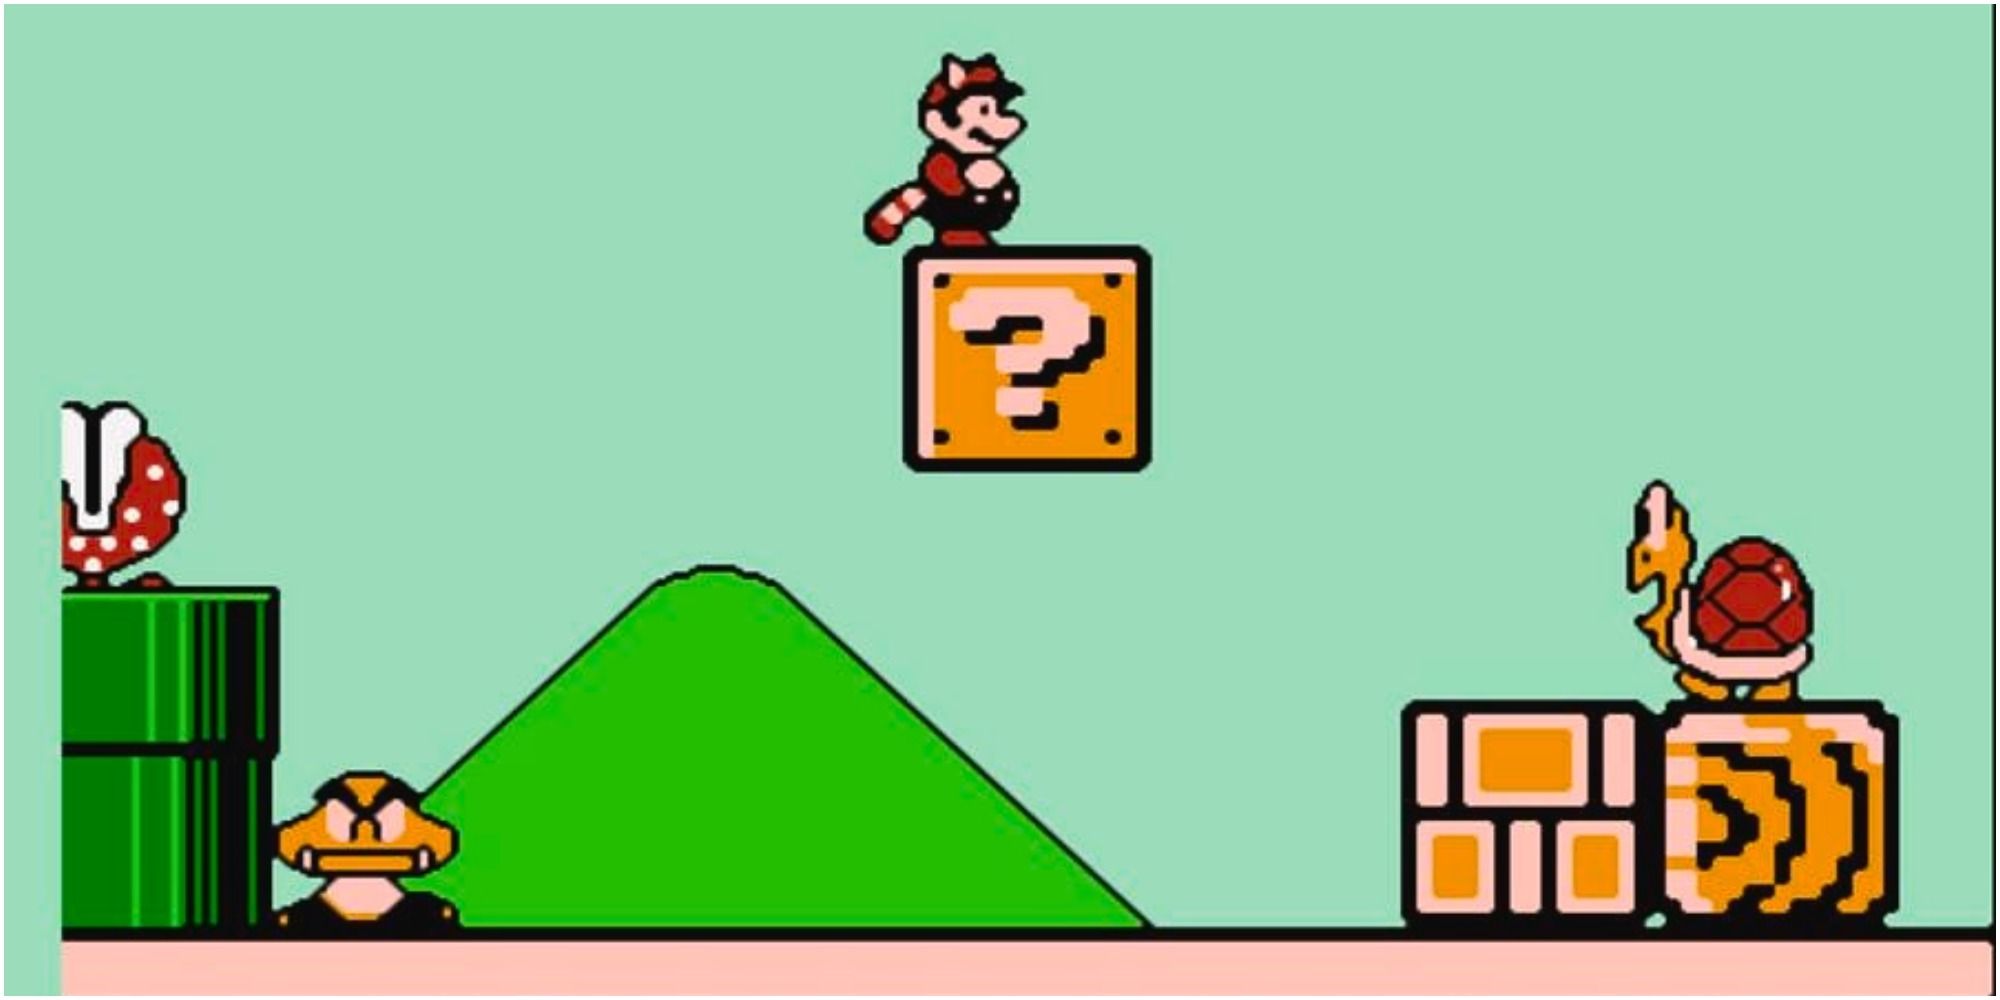 Mario Standing On A Block In Giant World in Super Mario Bros 3.